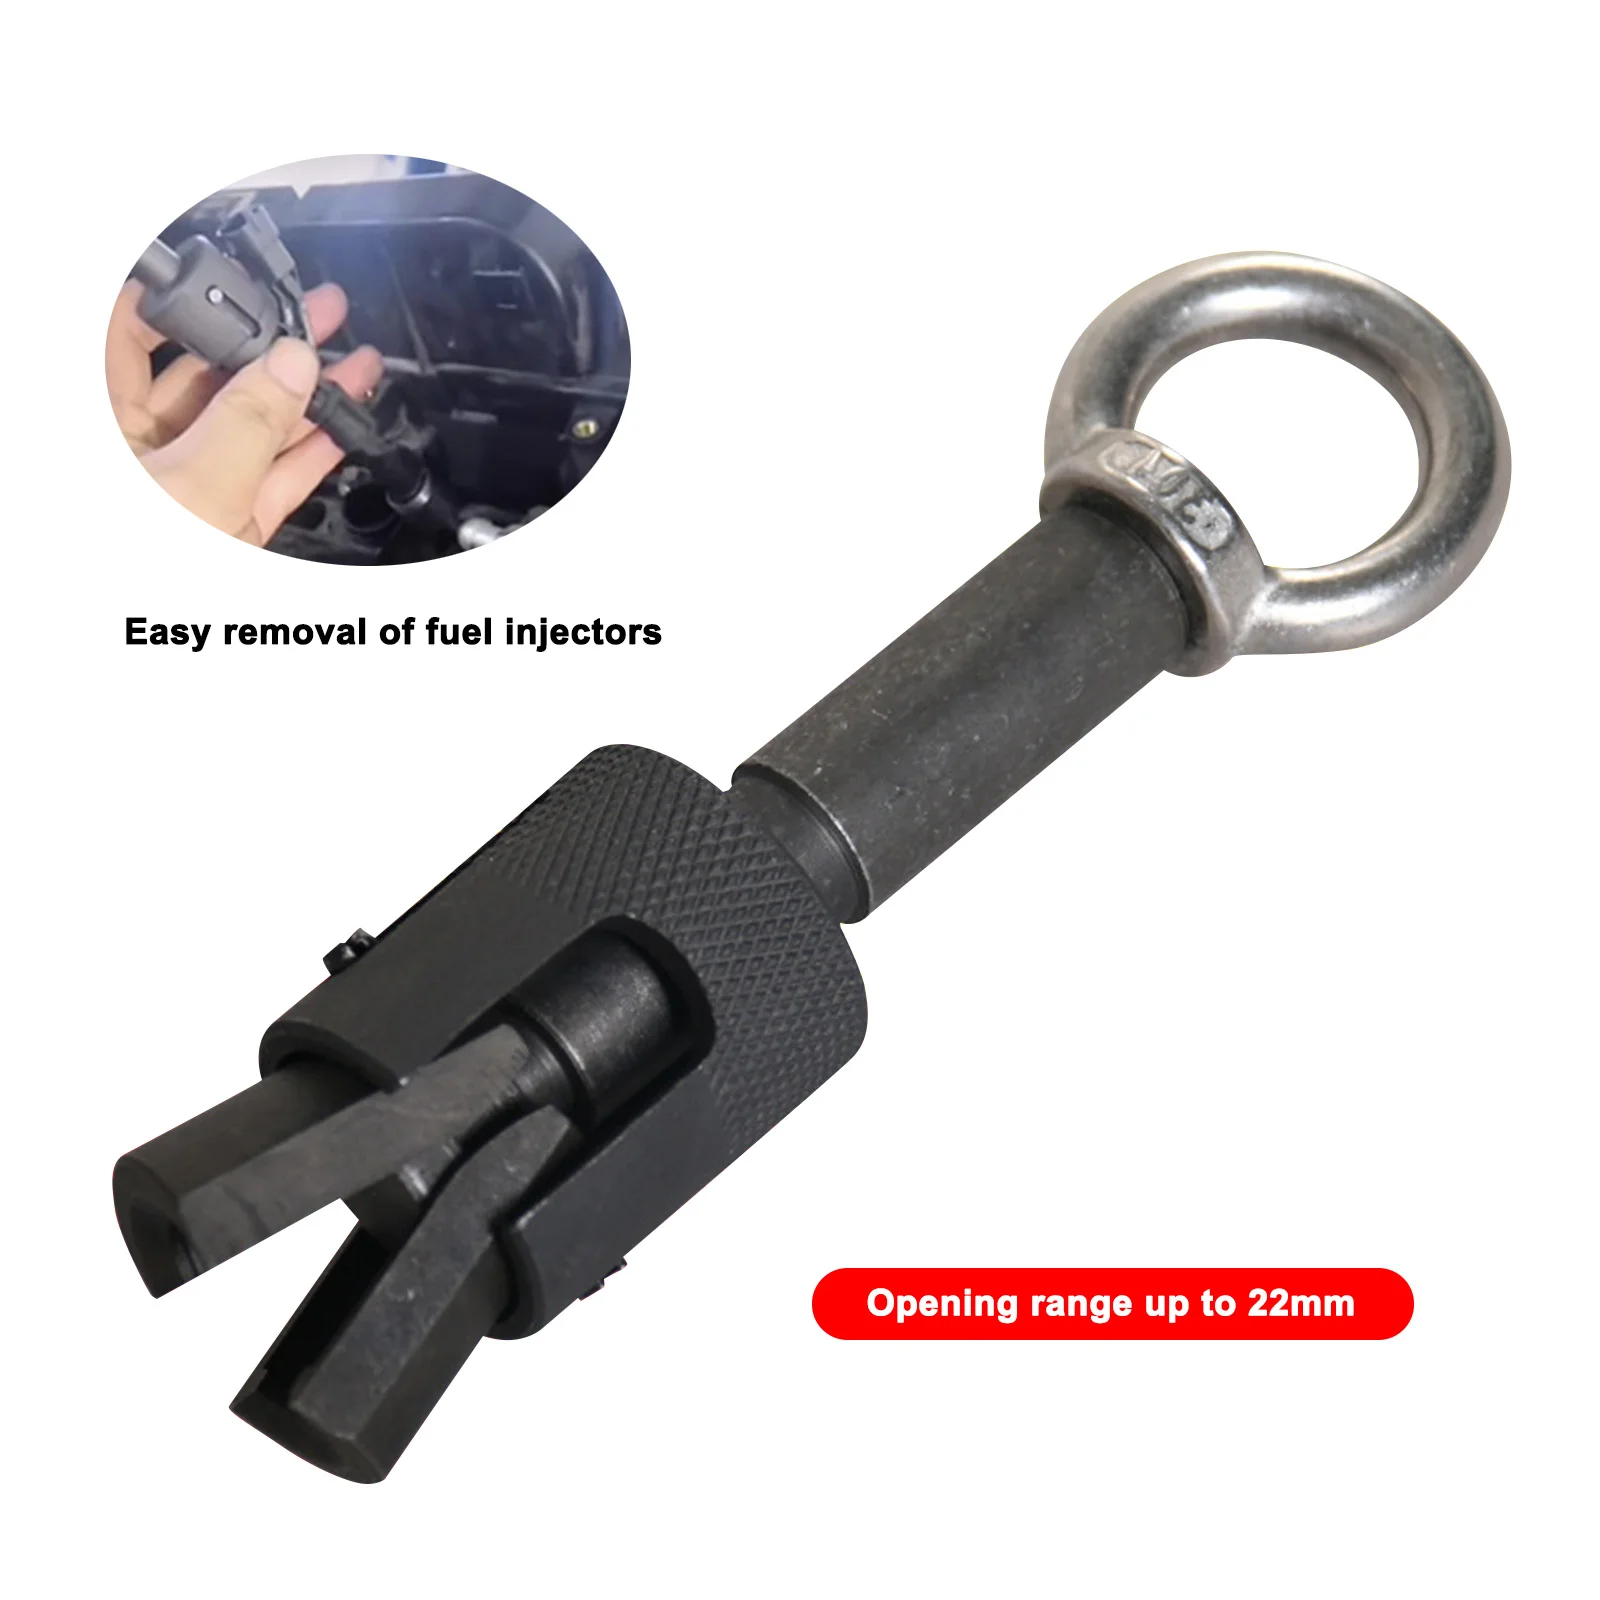 Elf Bee 310-197 Ngine Fuel Injector Remover Tool Puller Compatible with  Land Rover 5.0 Range and Jaguar 3.0